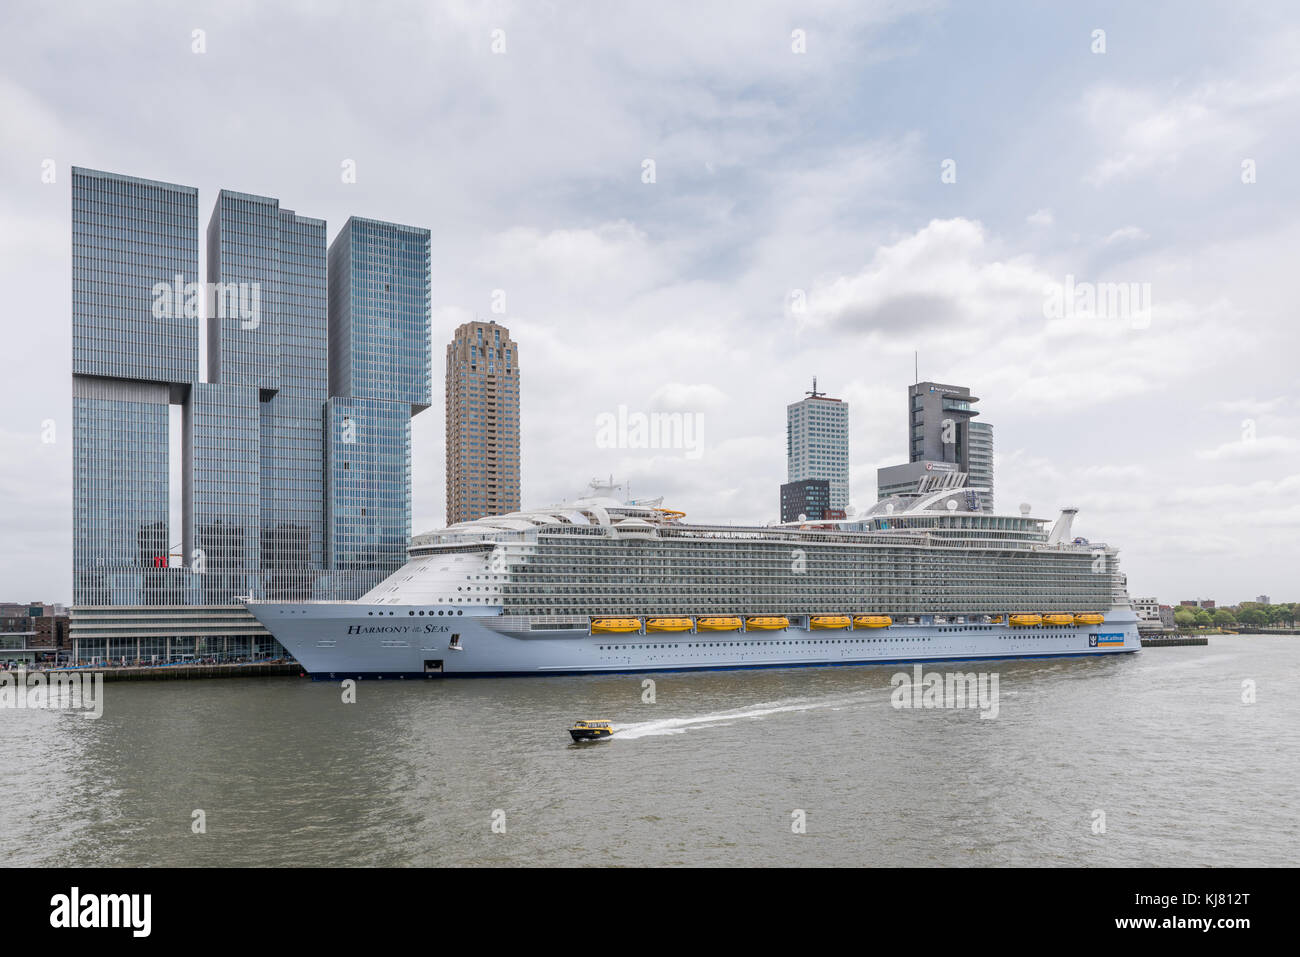 ROTTERDAM, THE NETHERLANDS - MAY 24, 2016: The largest cruise ship in the world Harmony of the Seas moored at the Wilhelminapier in Rotterdam on May 2 Stock Photo